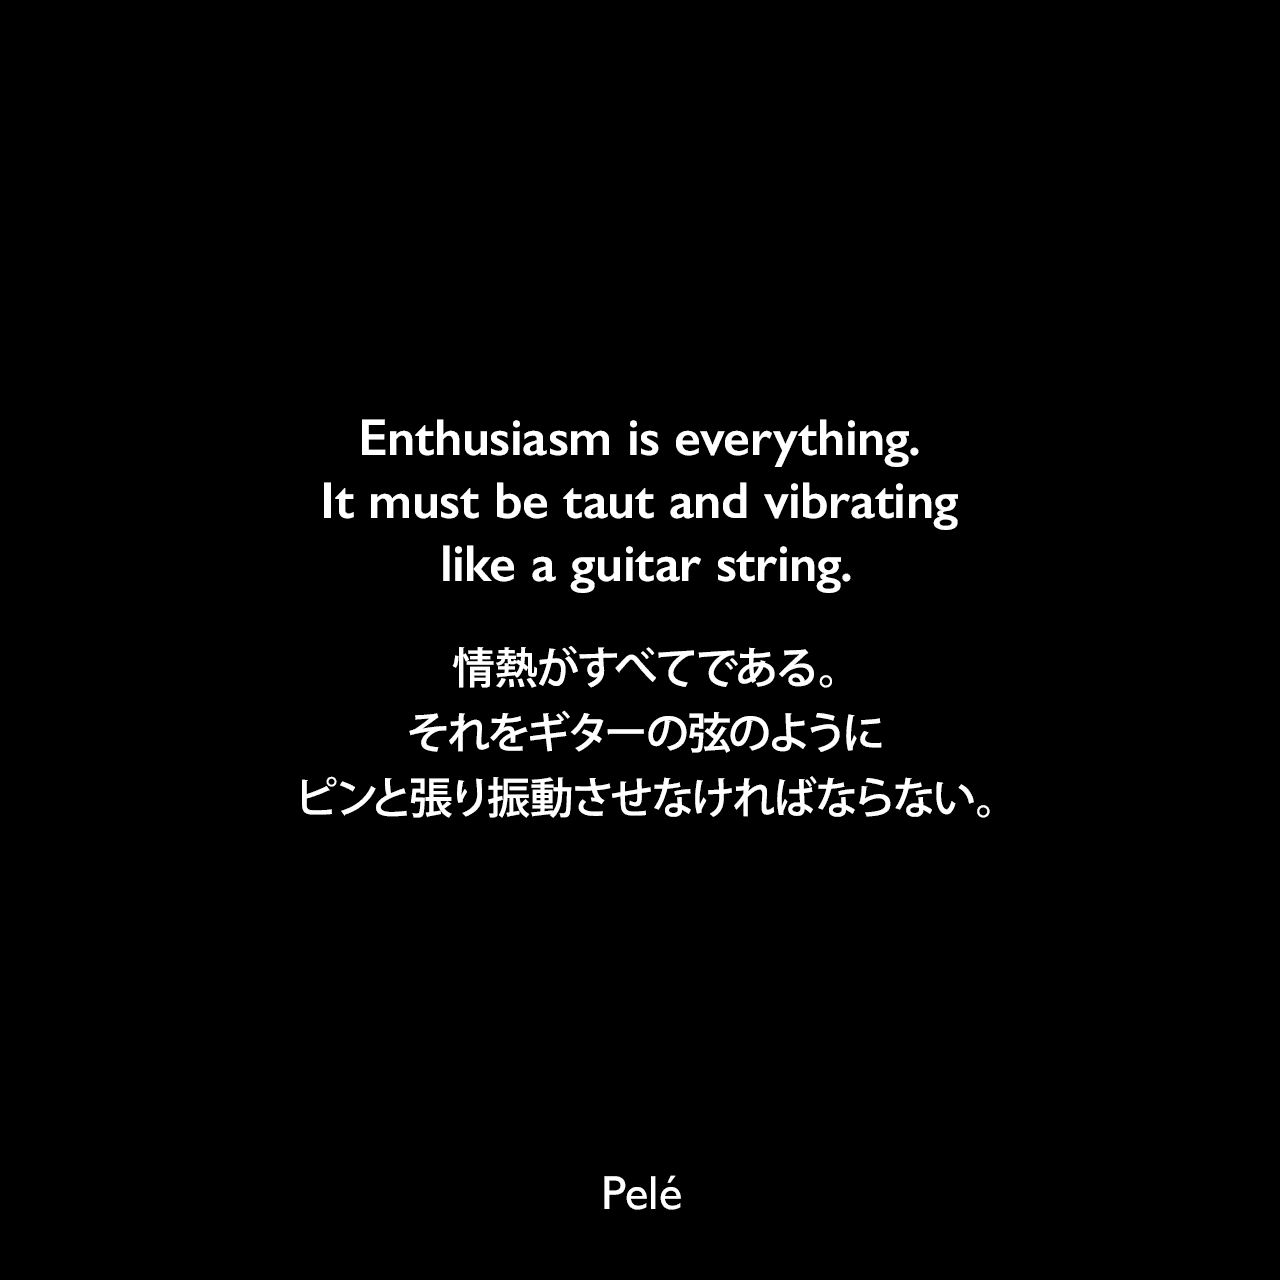 Enthusiasm is everything. It must be taut and vibrating like a guitar string.情熱がすべてである。それをギターの弦のようにピンと張り振動させなければならない。Pelé